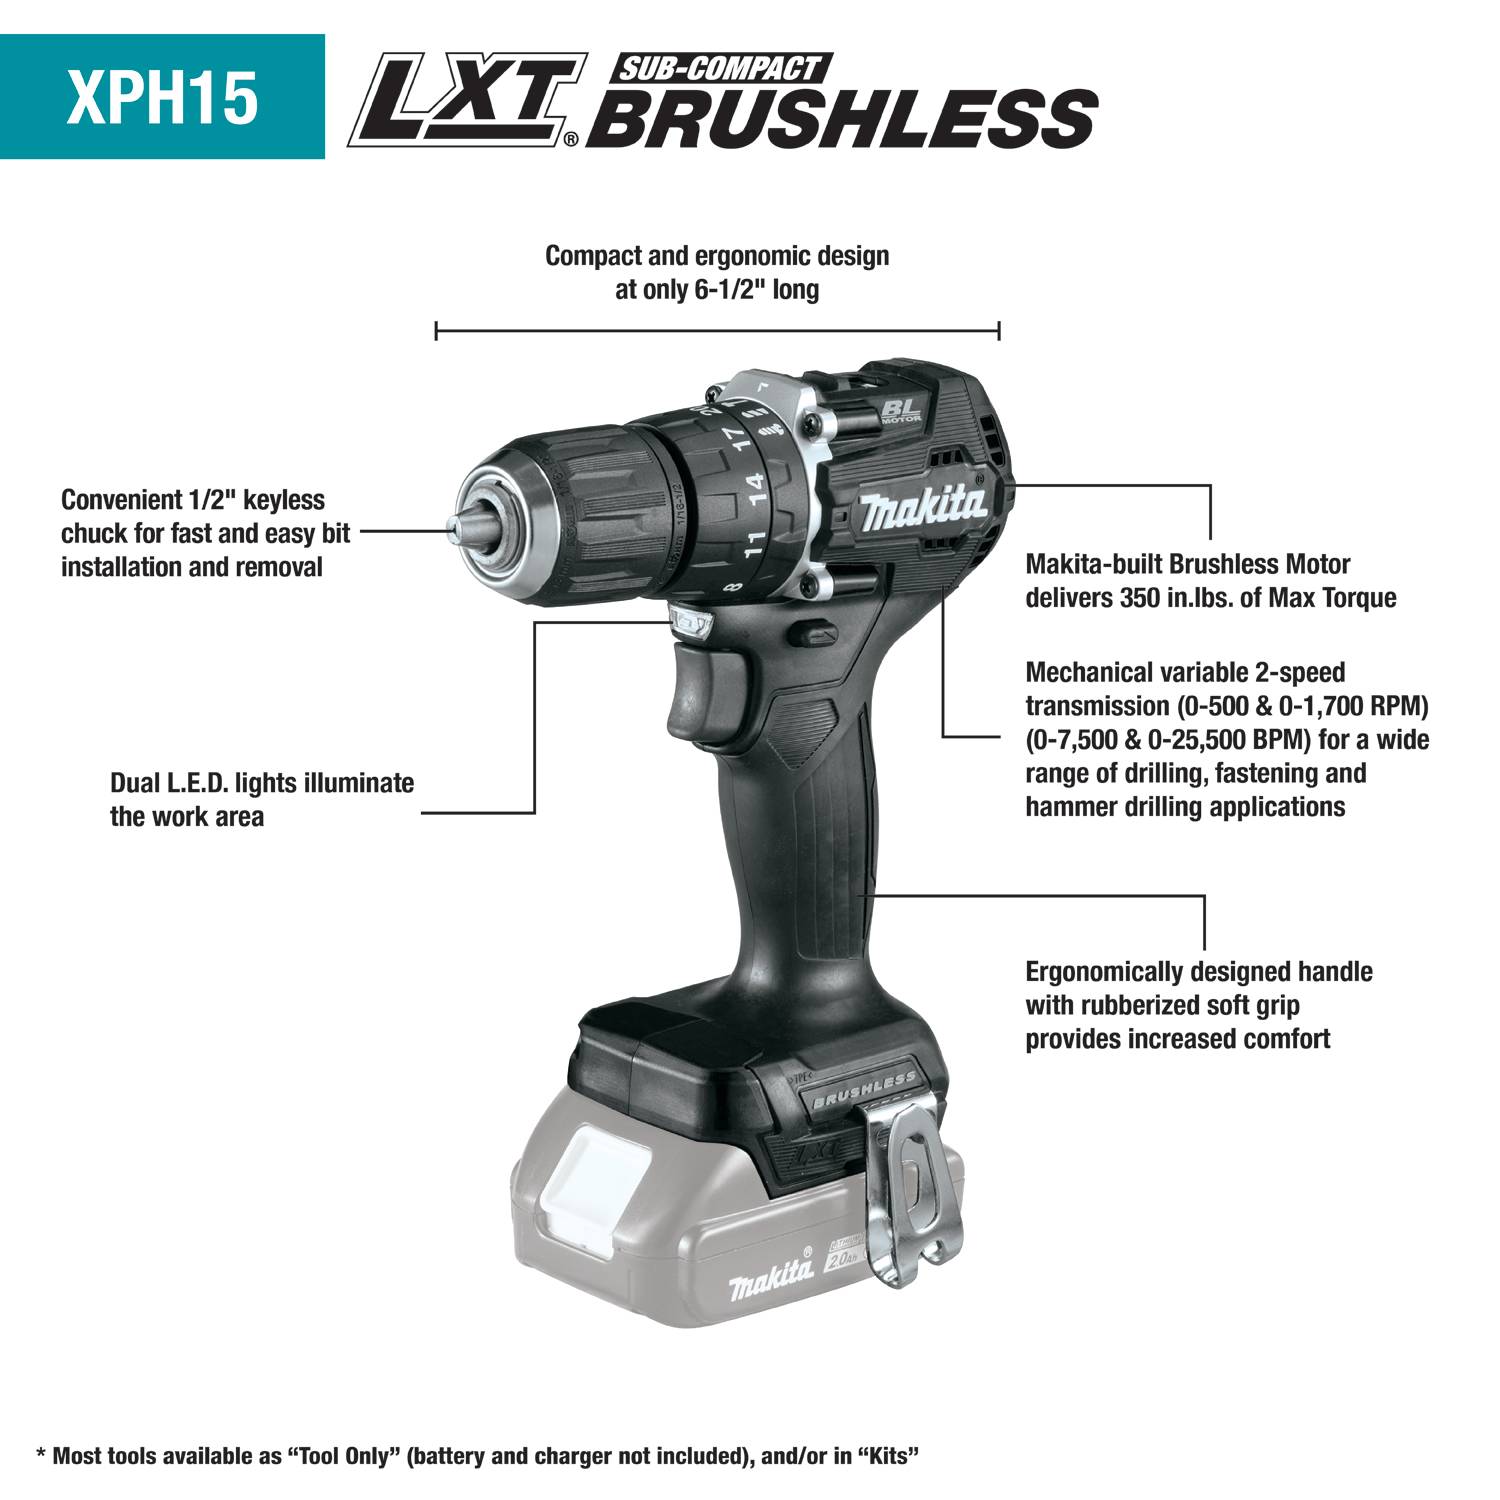 18V LXT Sub?Compact Brushless Cordless 1/2" Hammer Driver?Drill